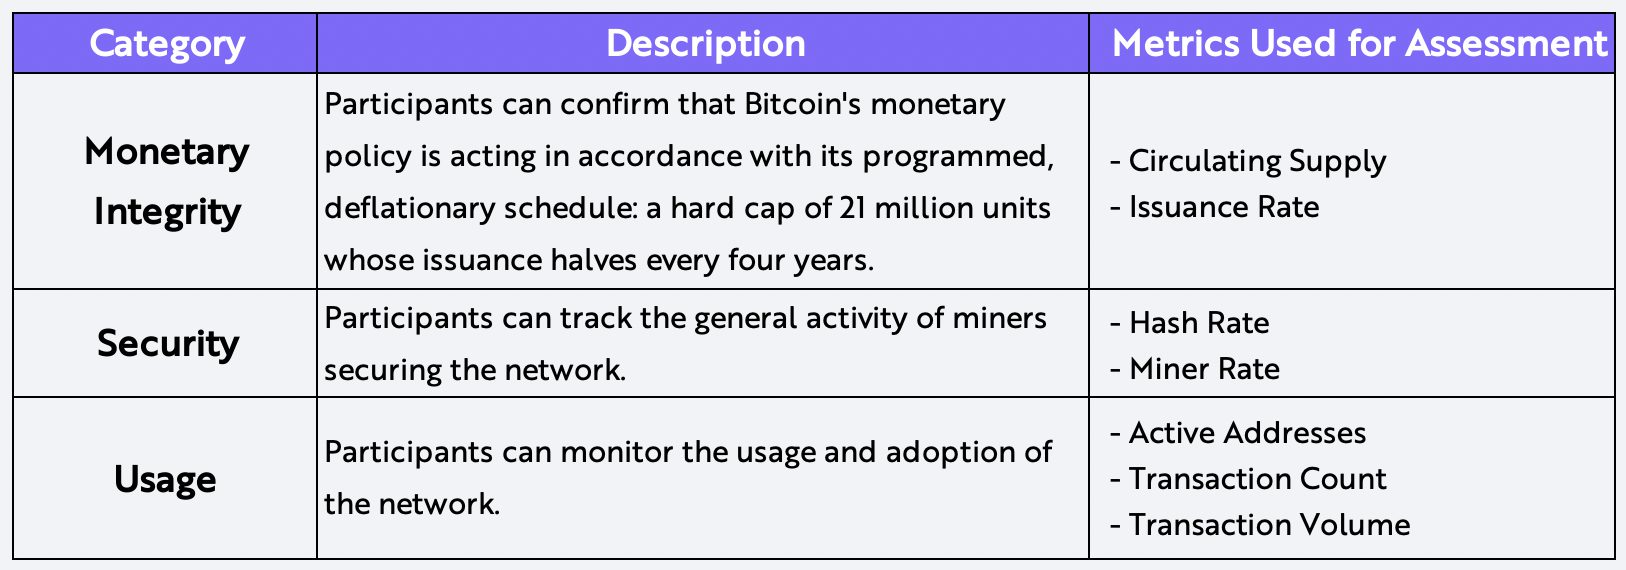 Evaluating Bitcoin Categories on-chain data